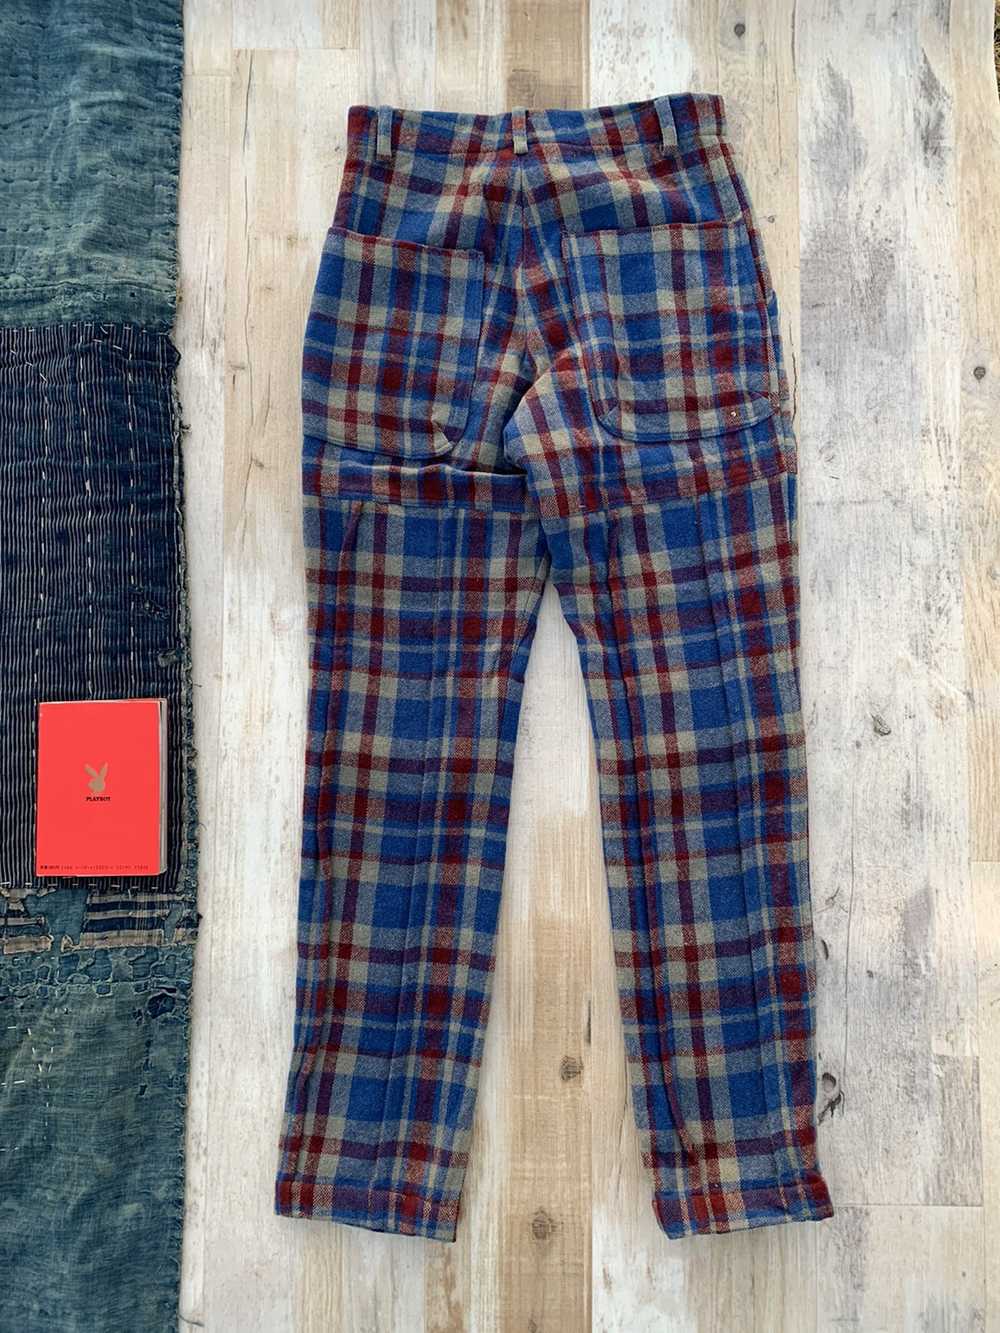 Undercover AW96 Wire Wool Plaid Pants - image 3